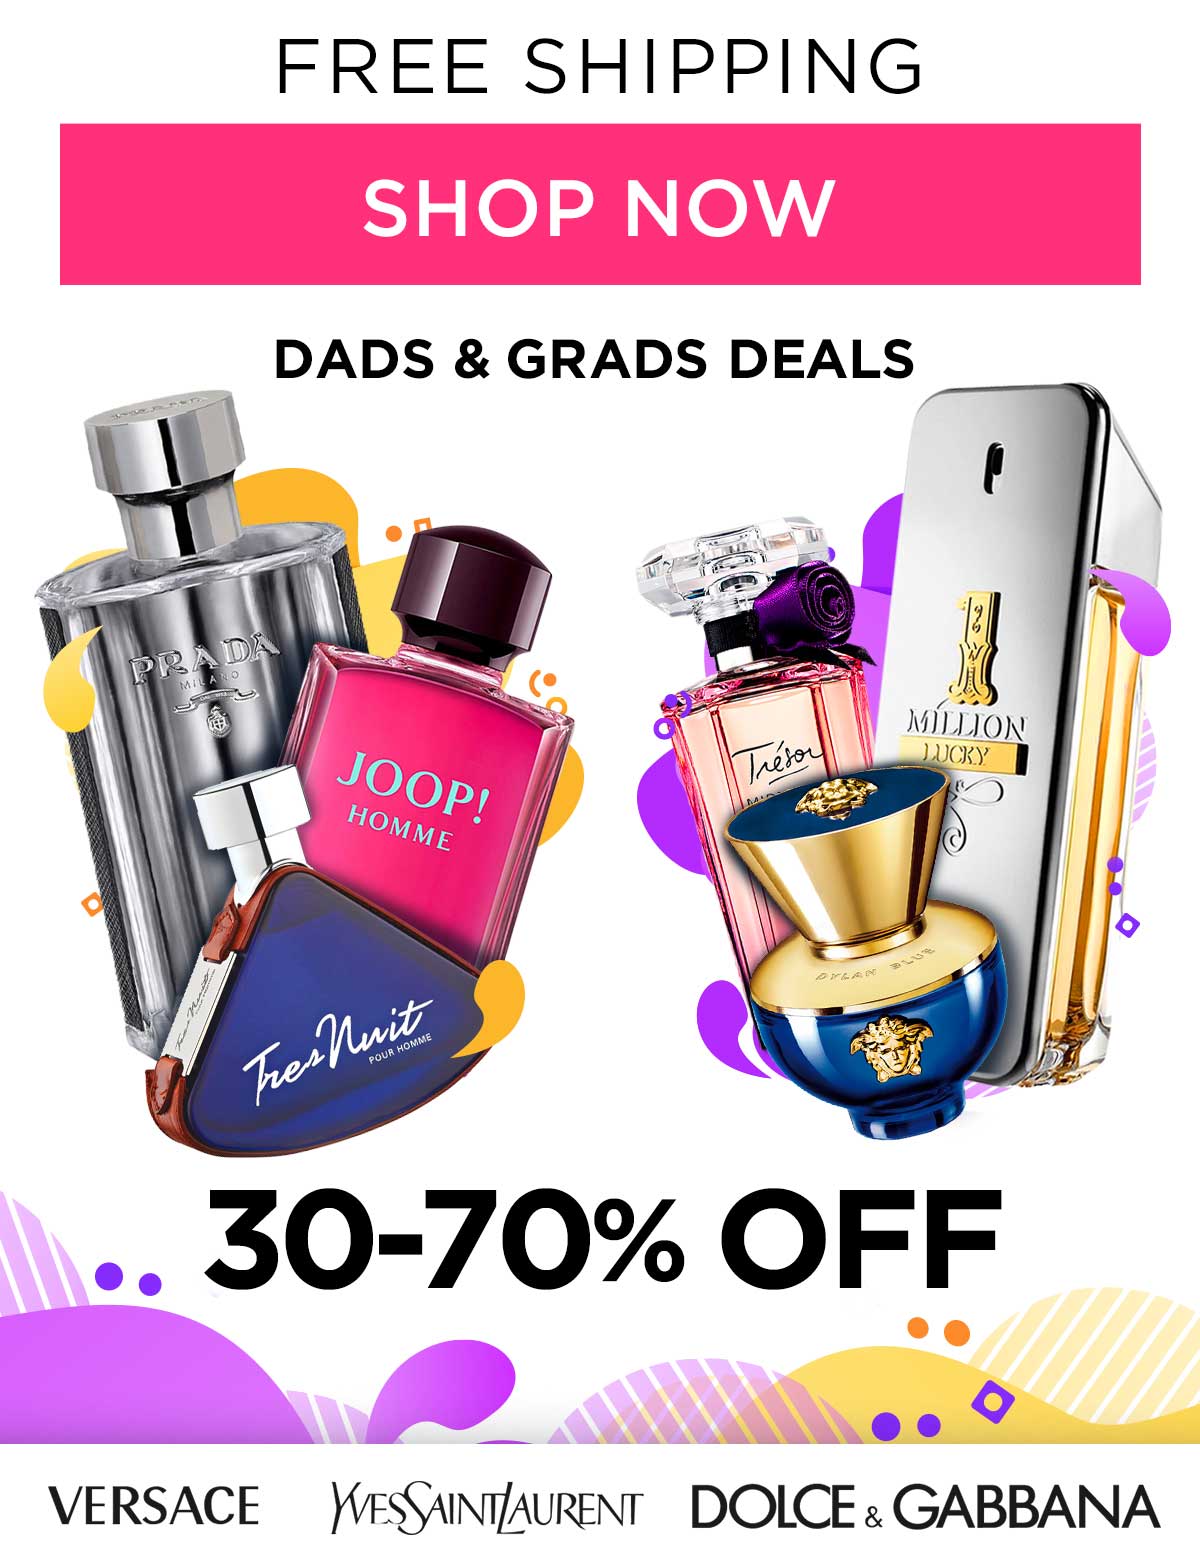 Dads & Grads Sale | 30-70% Off | Free Shipping